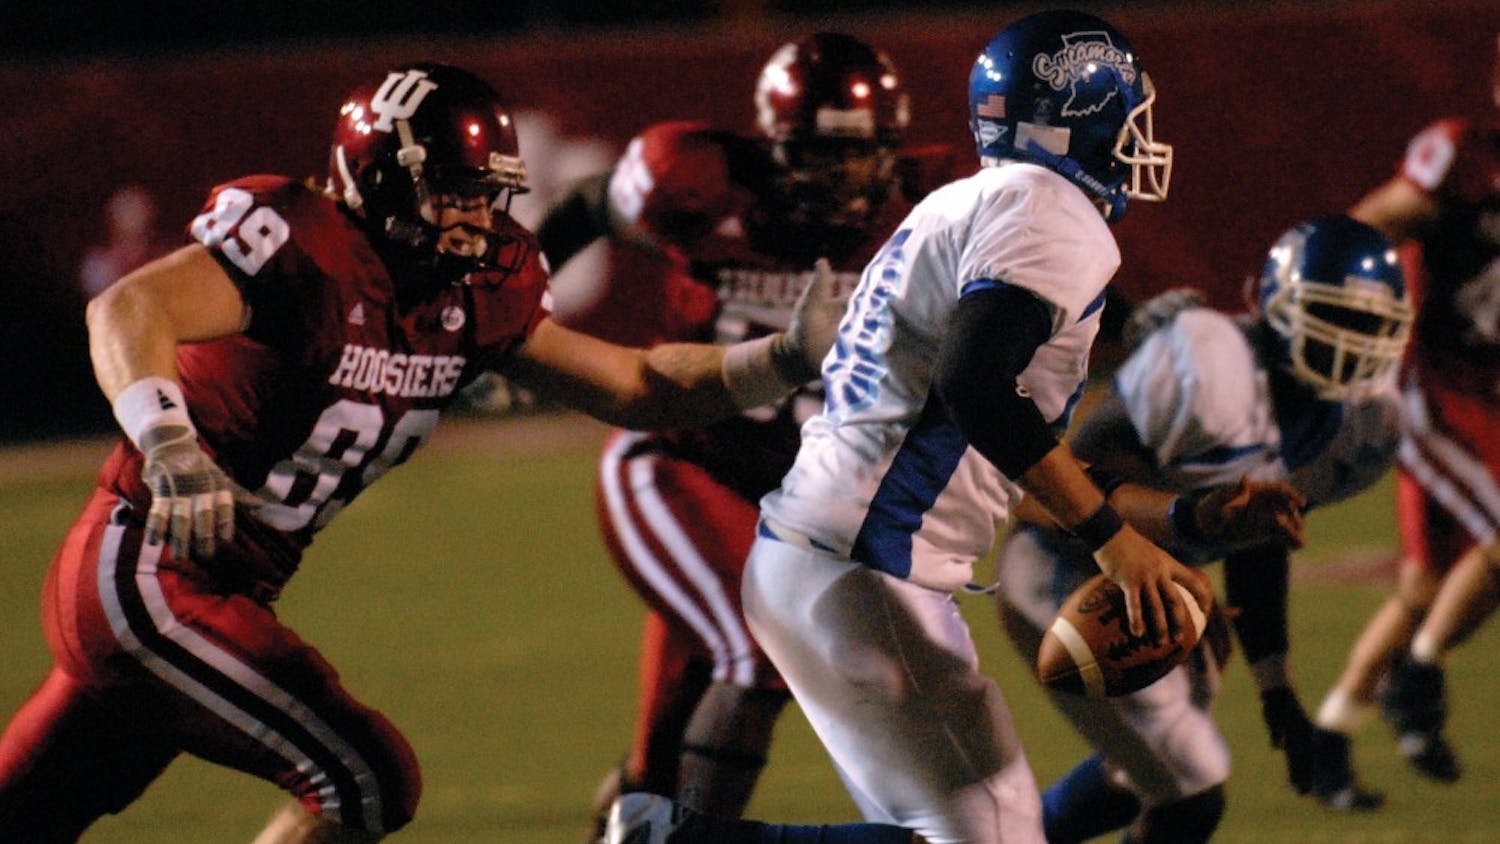 IU tight end Brian Zematis chases after Indiana State quarterback Reilly Murphy during the 4th quarter of IU's 55-7 victory in 2007 at Memorial Stadium. It was the first game for IU since the death of Coach Terry Hoeppner.&nbsp;